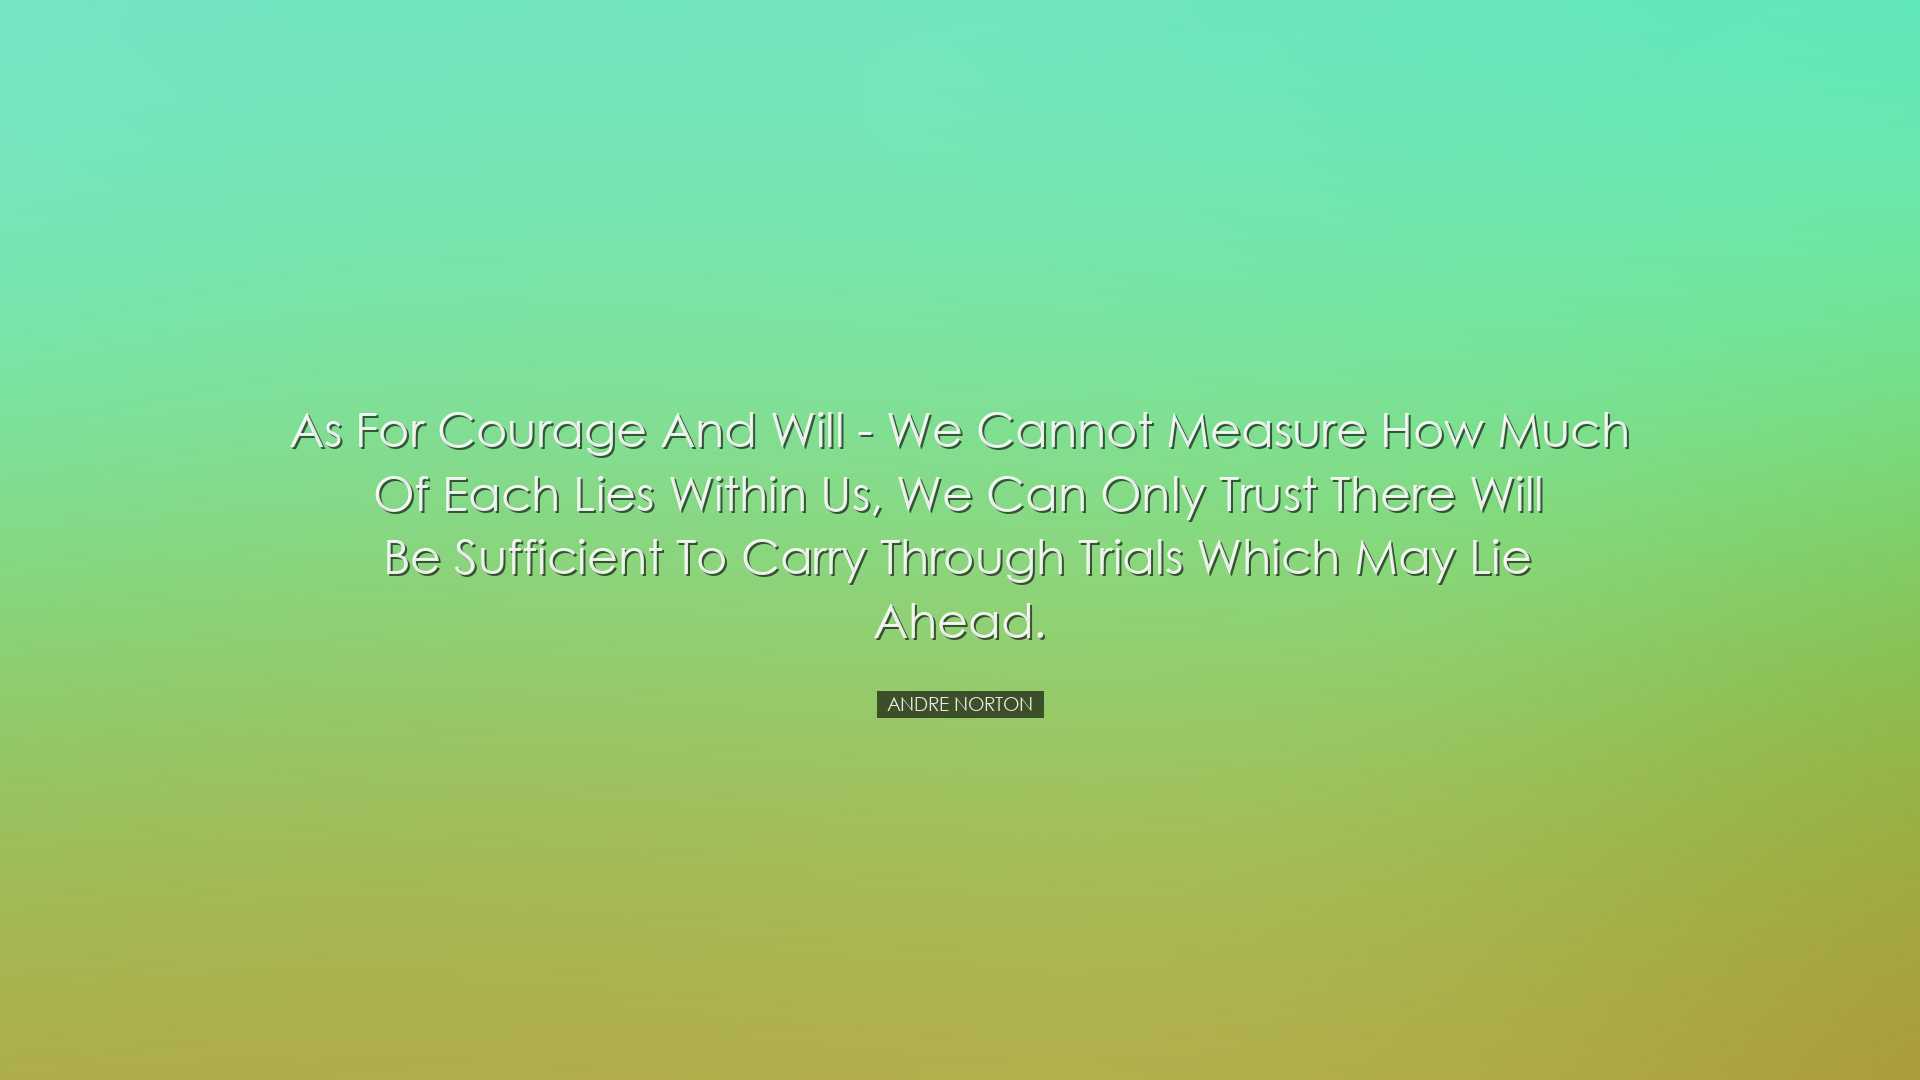 As for courage and will - we cannot measure how much of each lies